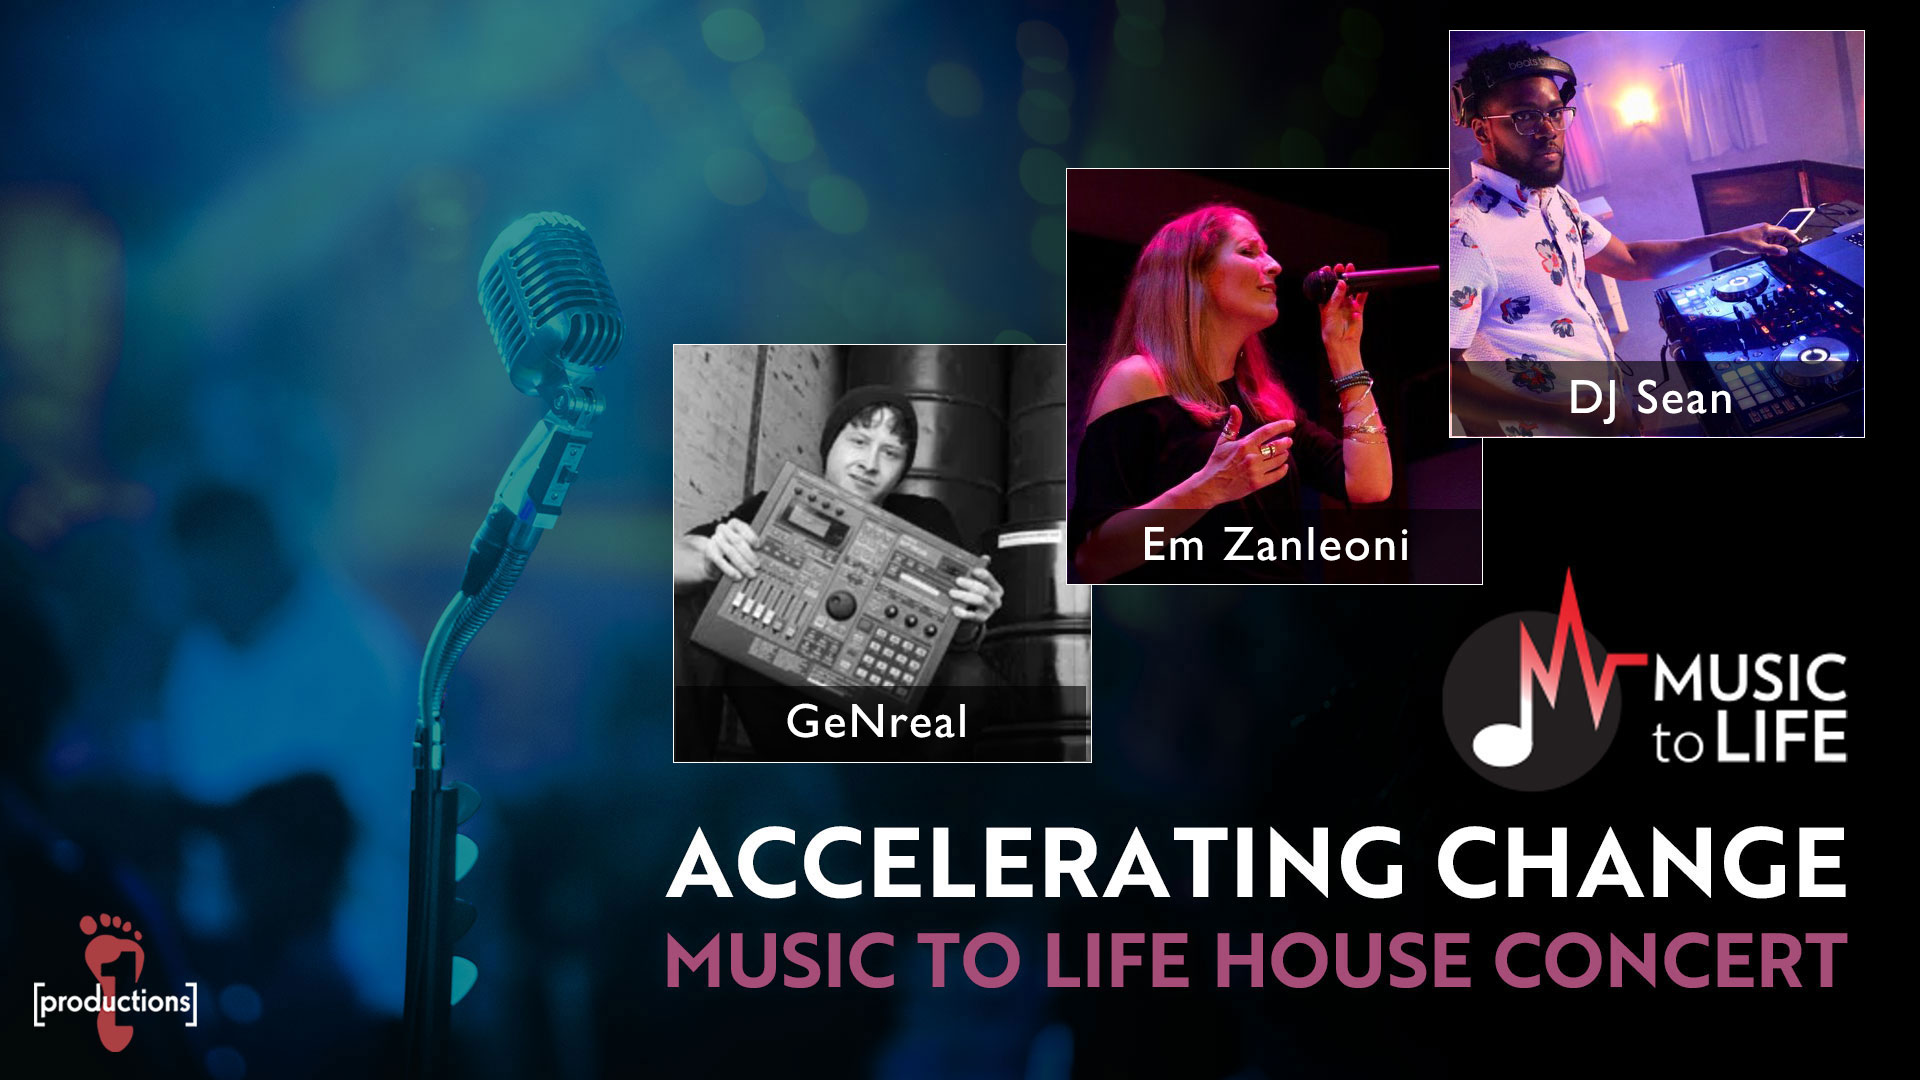 Accelerating Change House Concert: Oct. 25, 2020